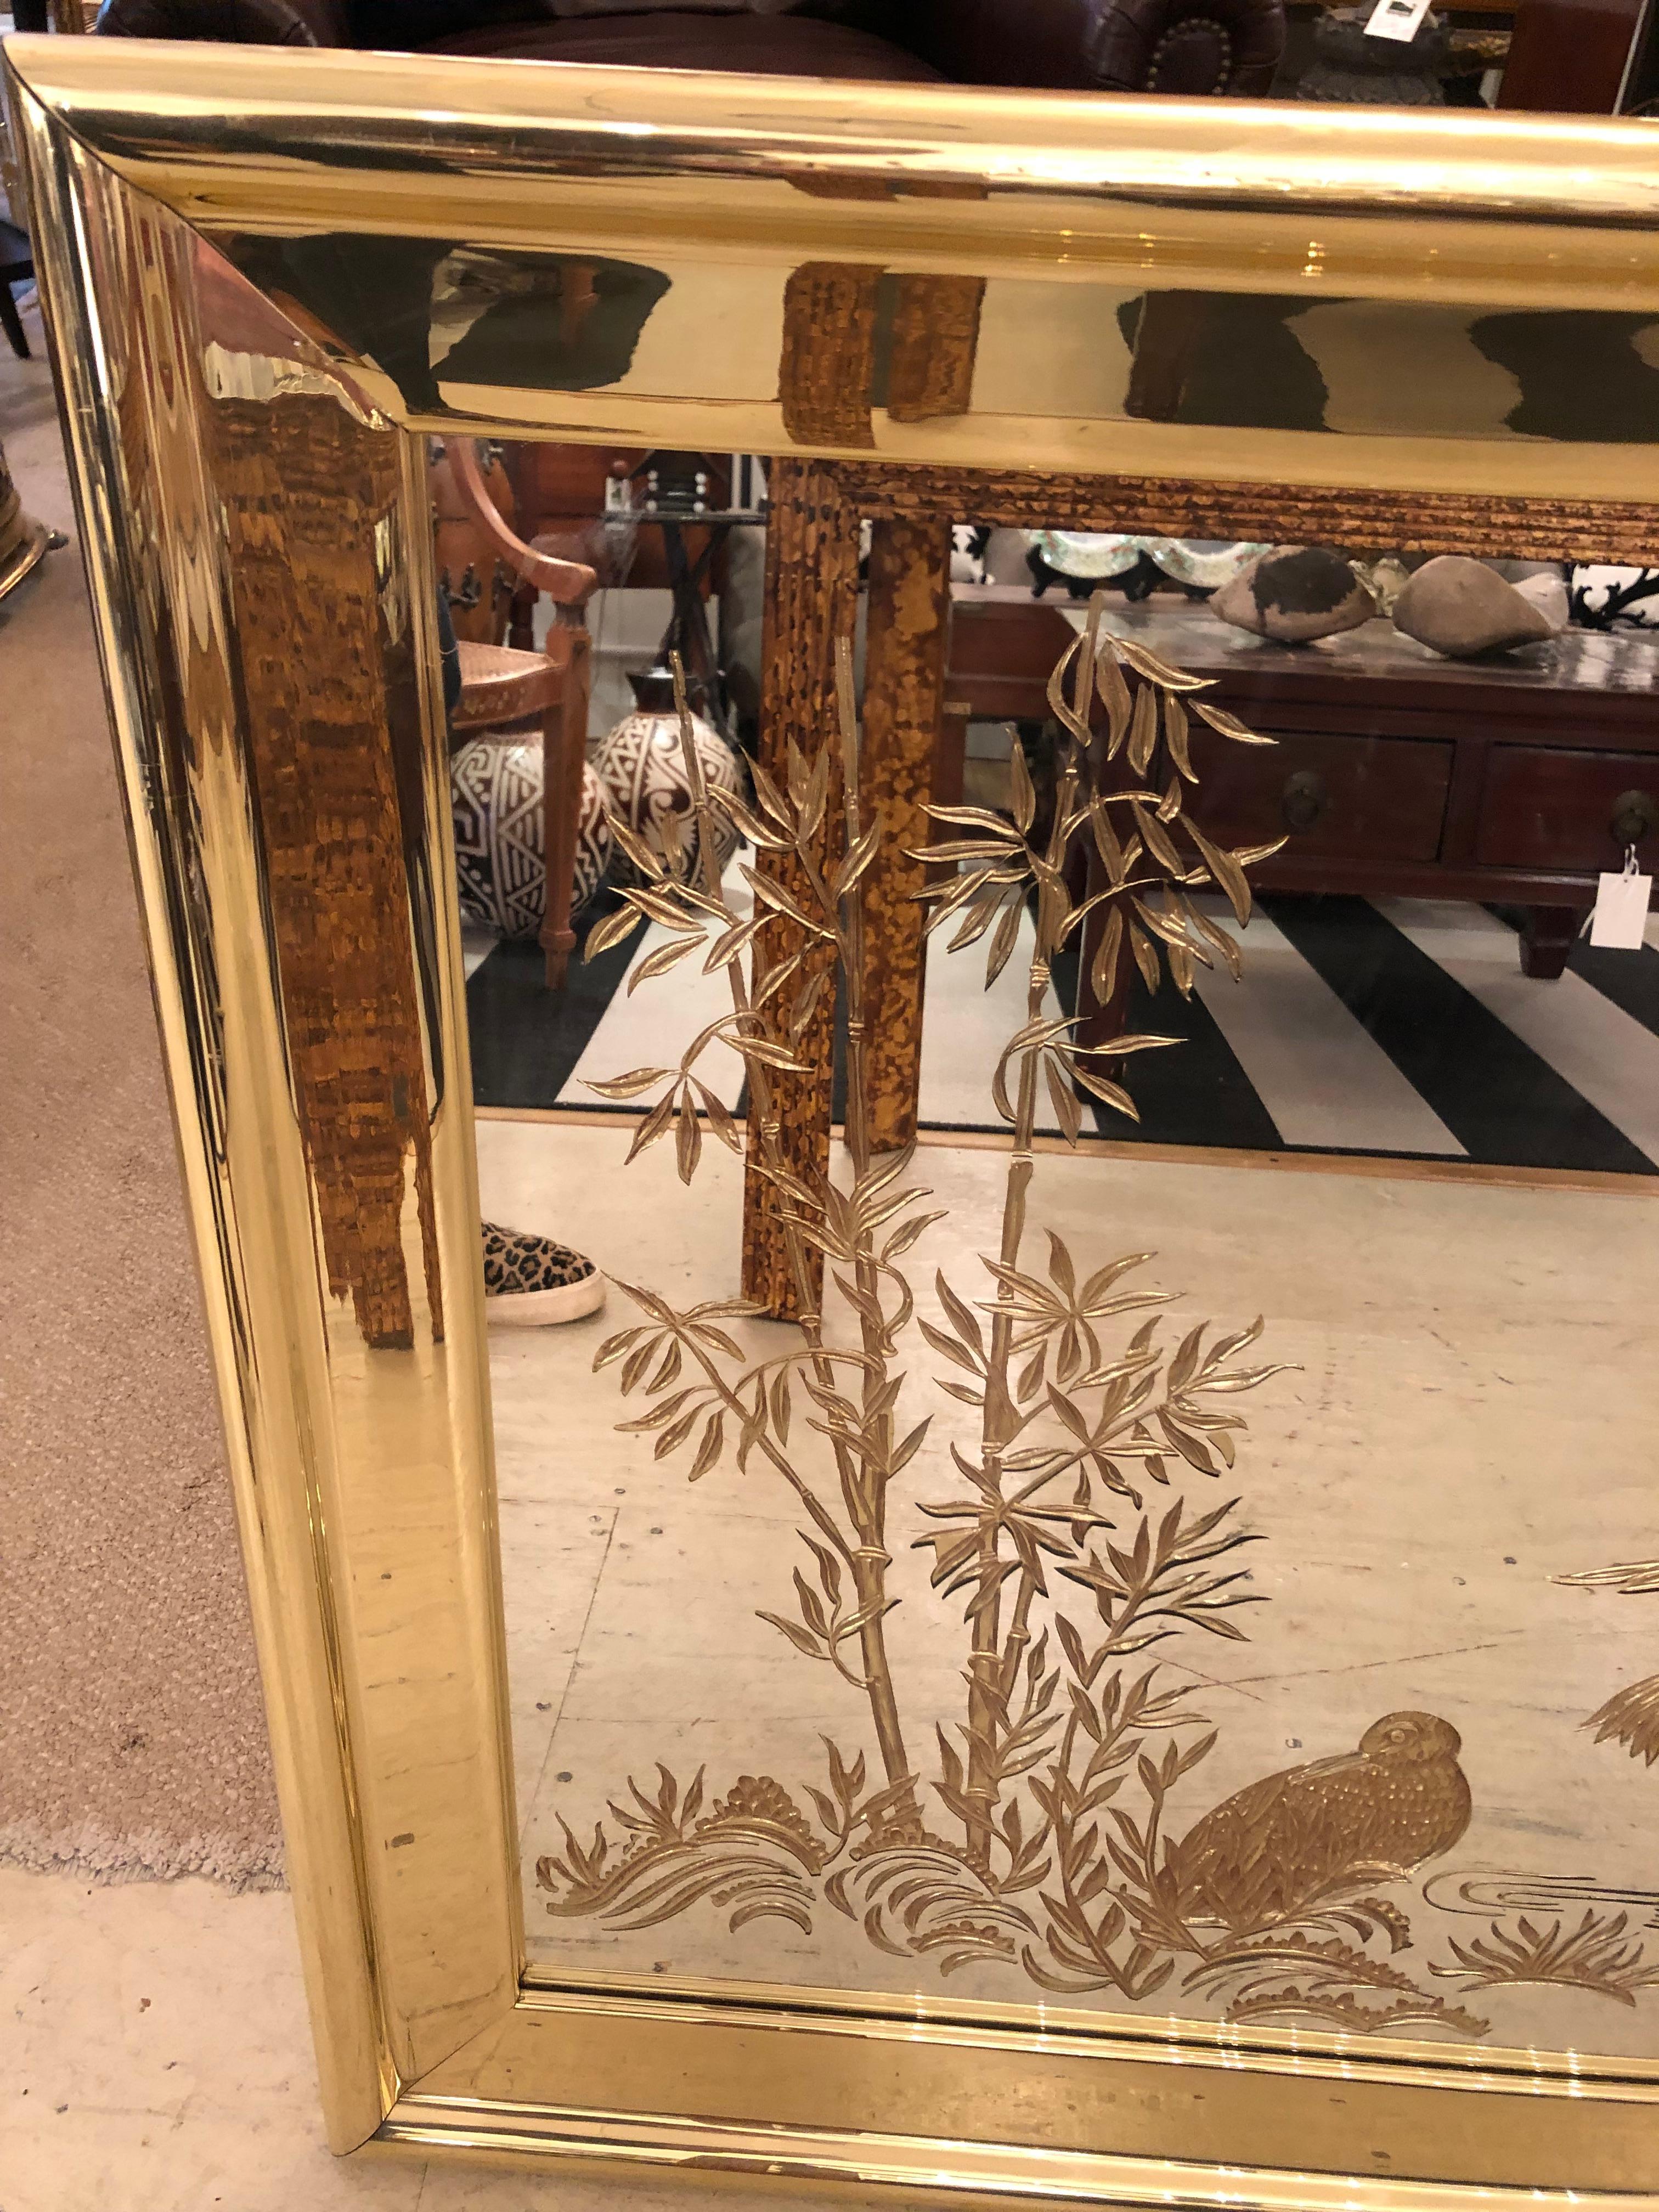 A large glamorous rectangular etched mirror having reverse eglomise gold decoration of cranes and Asian inspired landscape. Big gutsy brass frame adds a spicy touch.